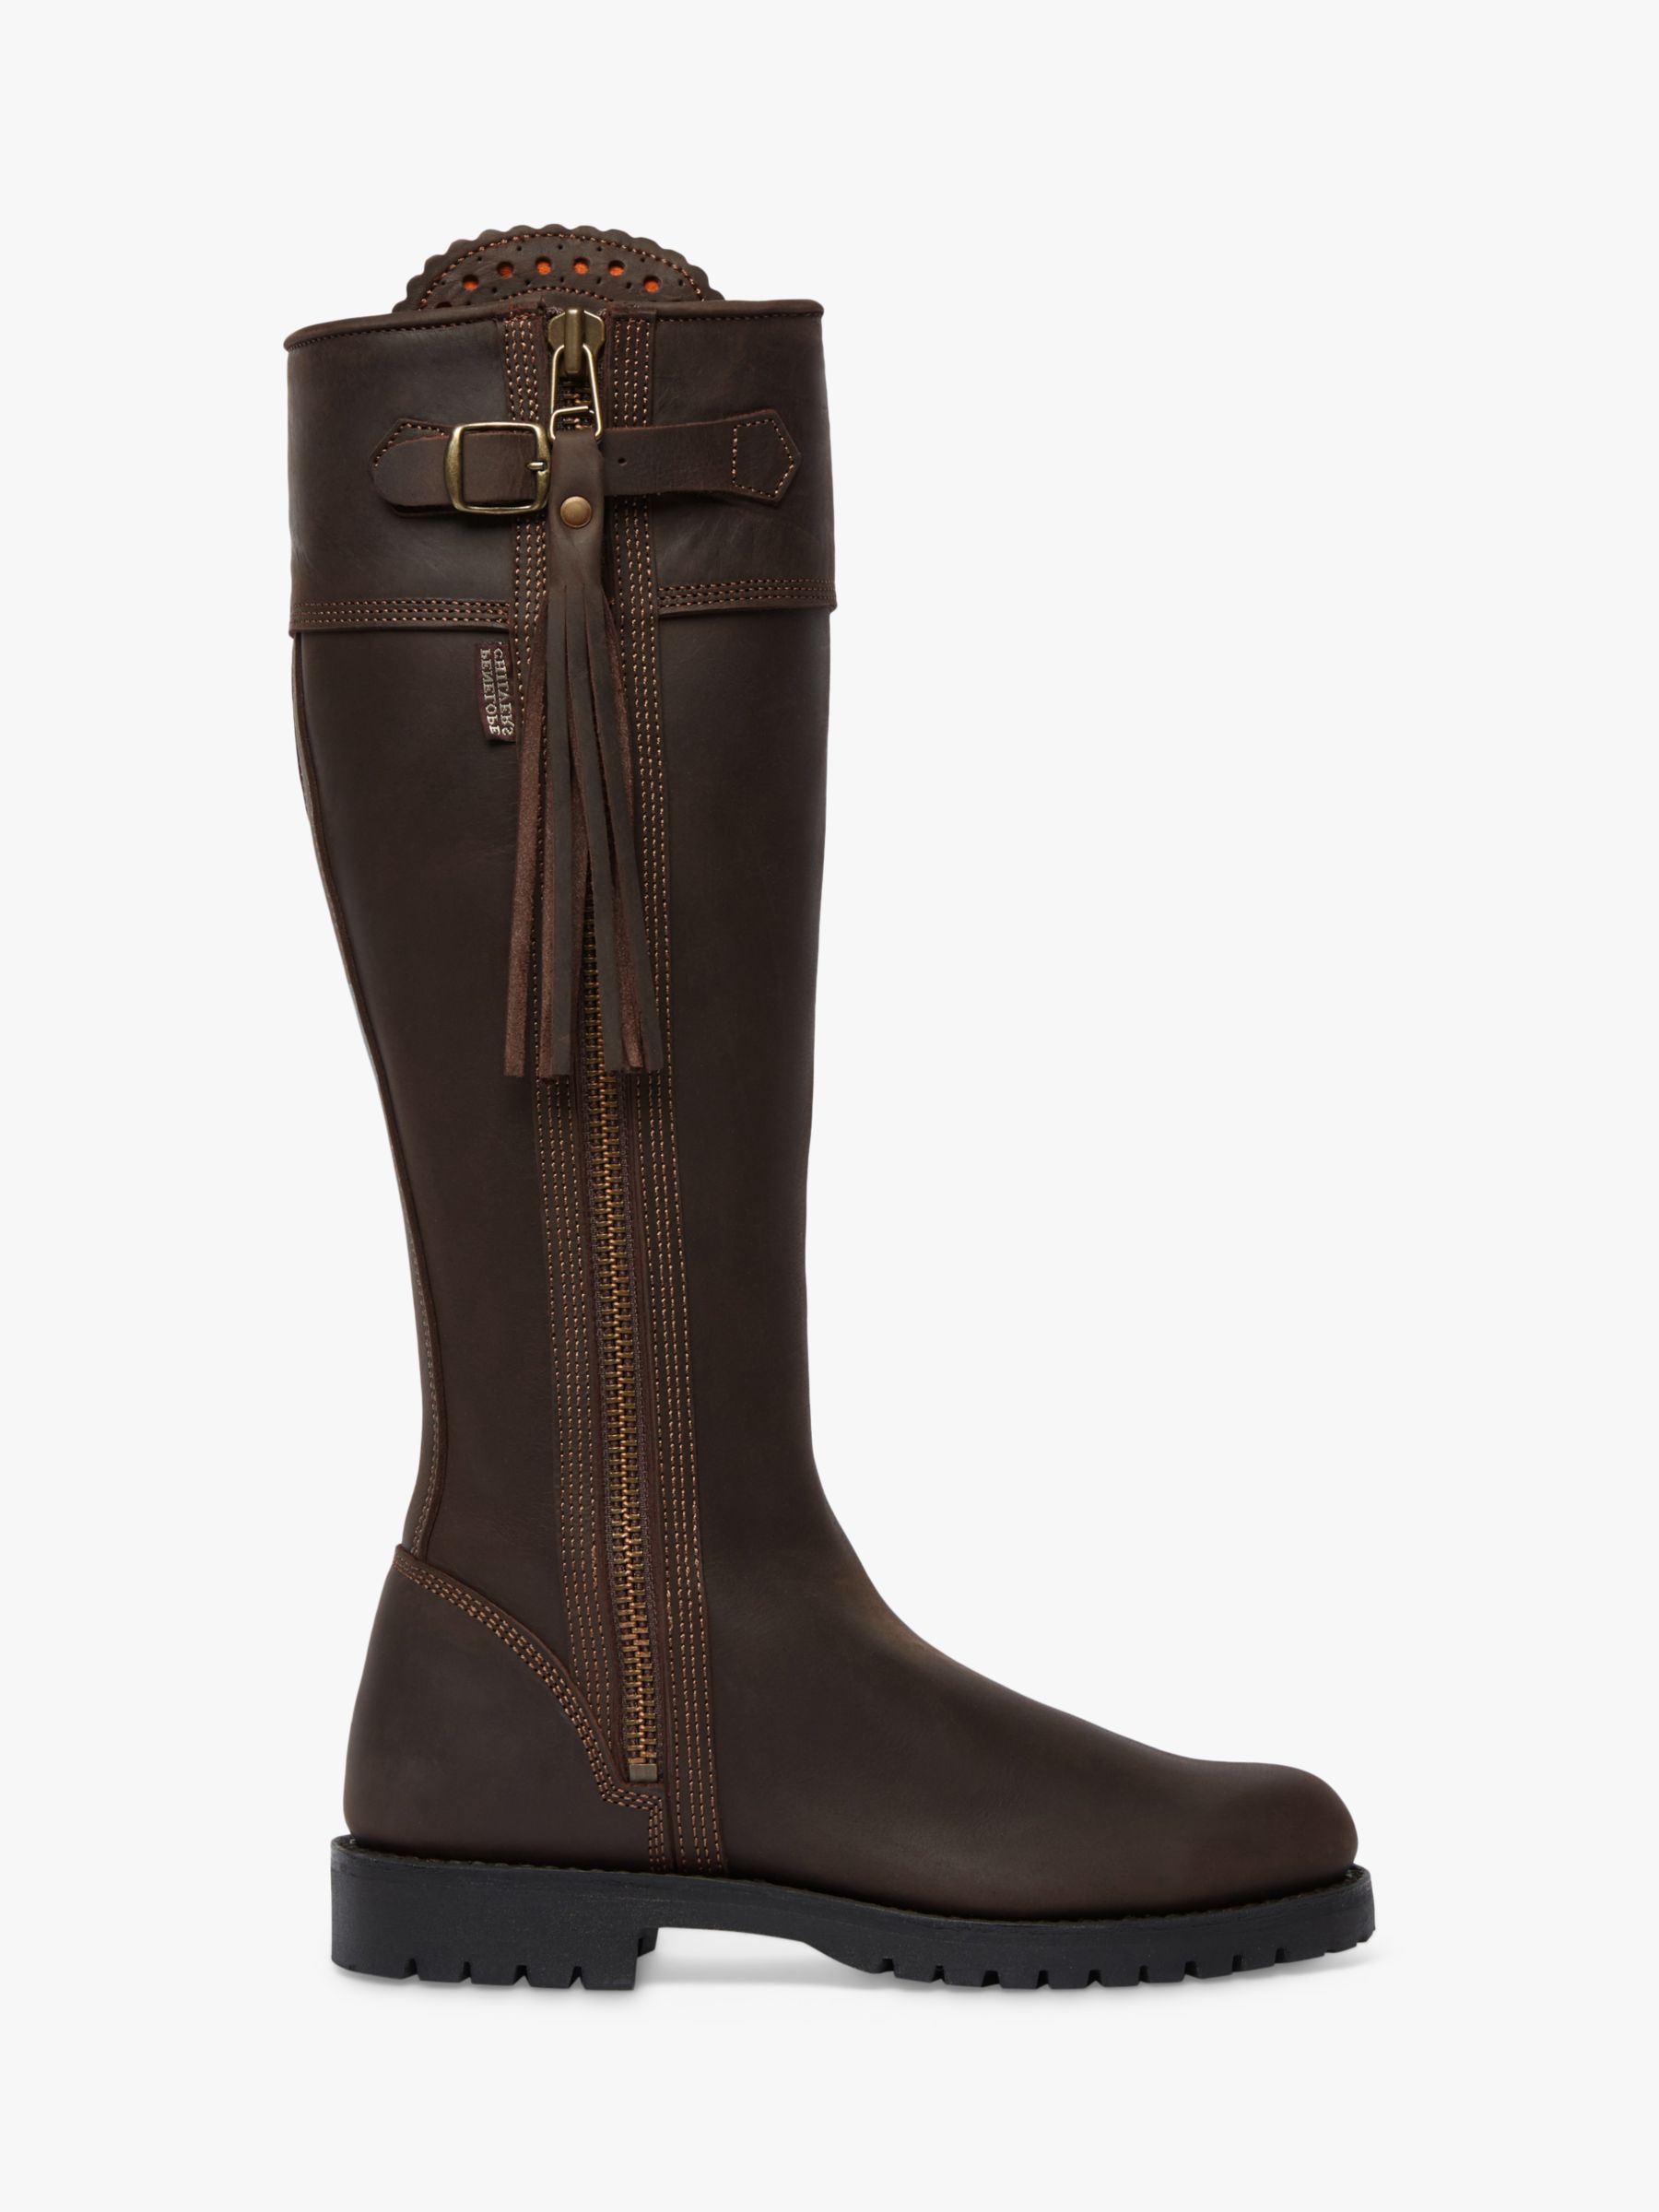 Penelope Chilvers Stand Tassel Knee Boots, Conker at John Lewis & Partners